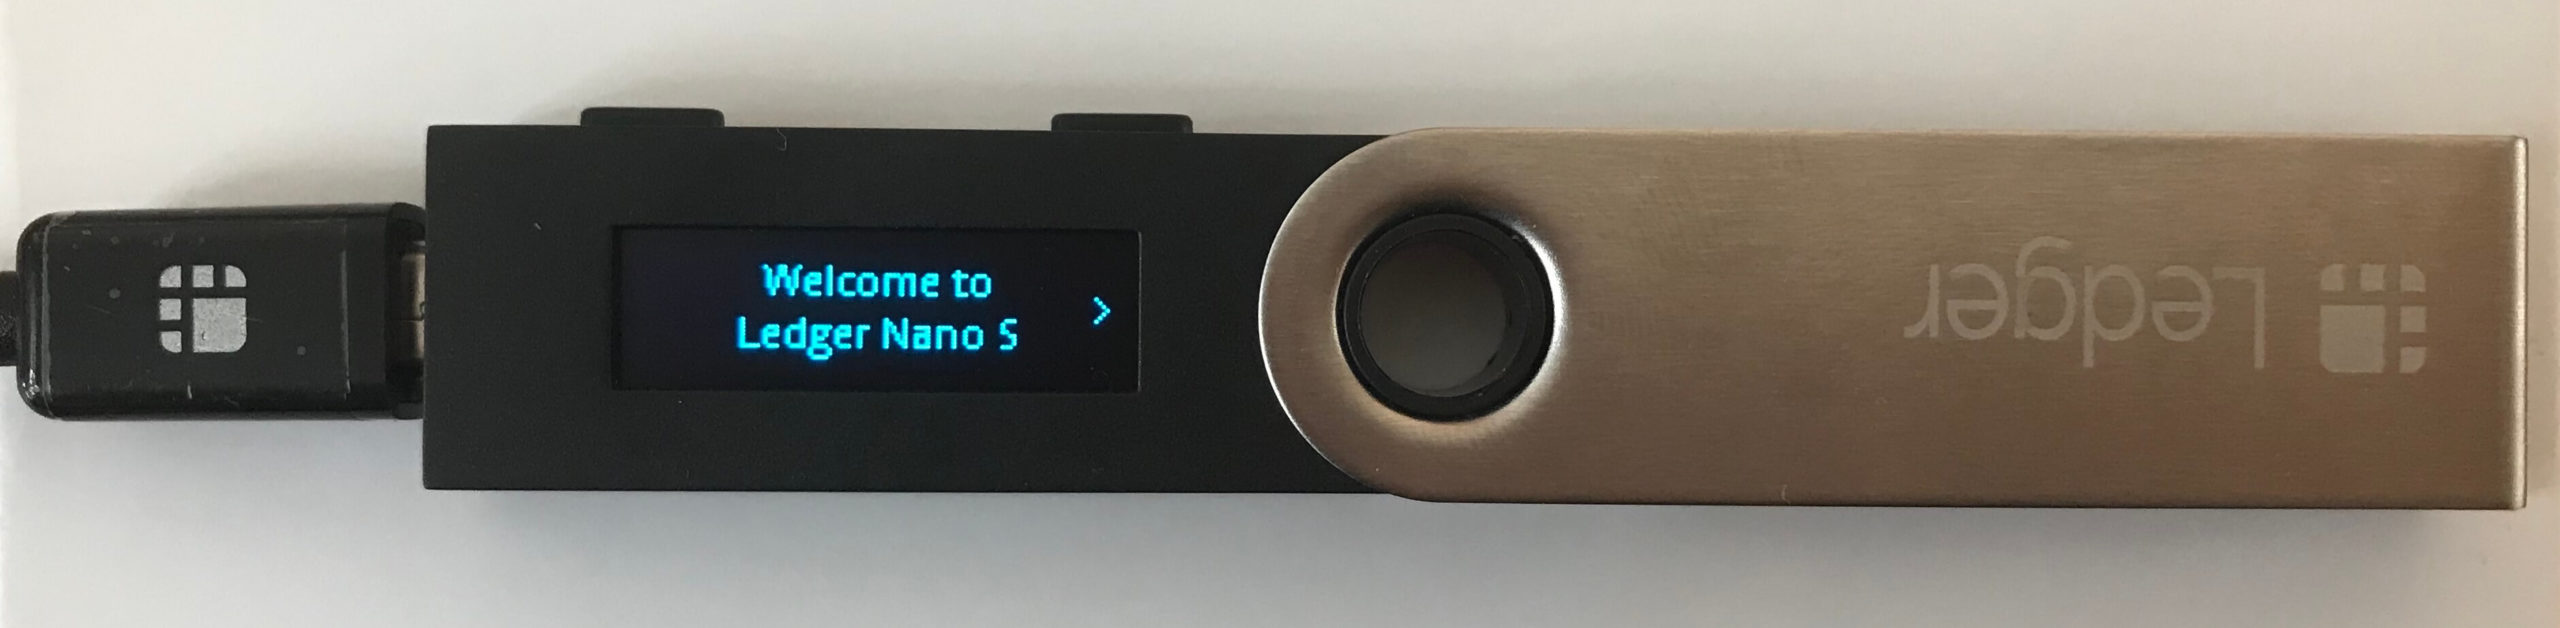 A closeup photo of nano ledger s to illustrate how to set up and use the nano ledger s